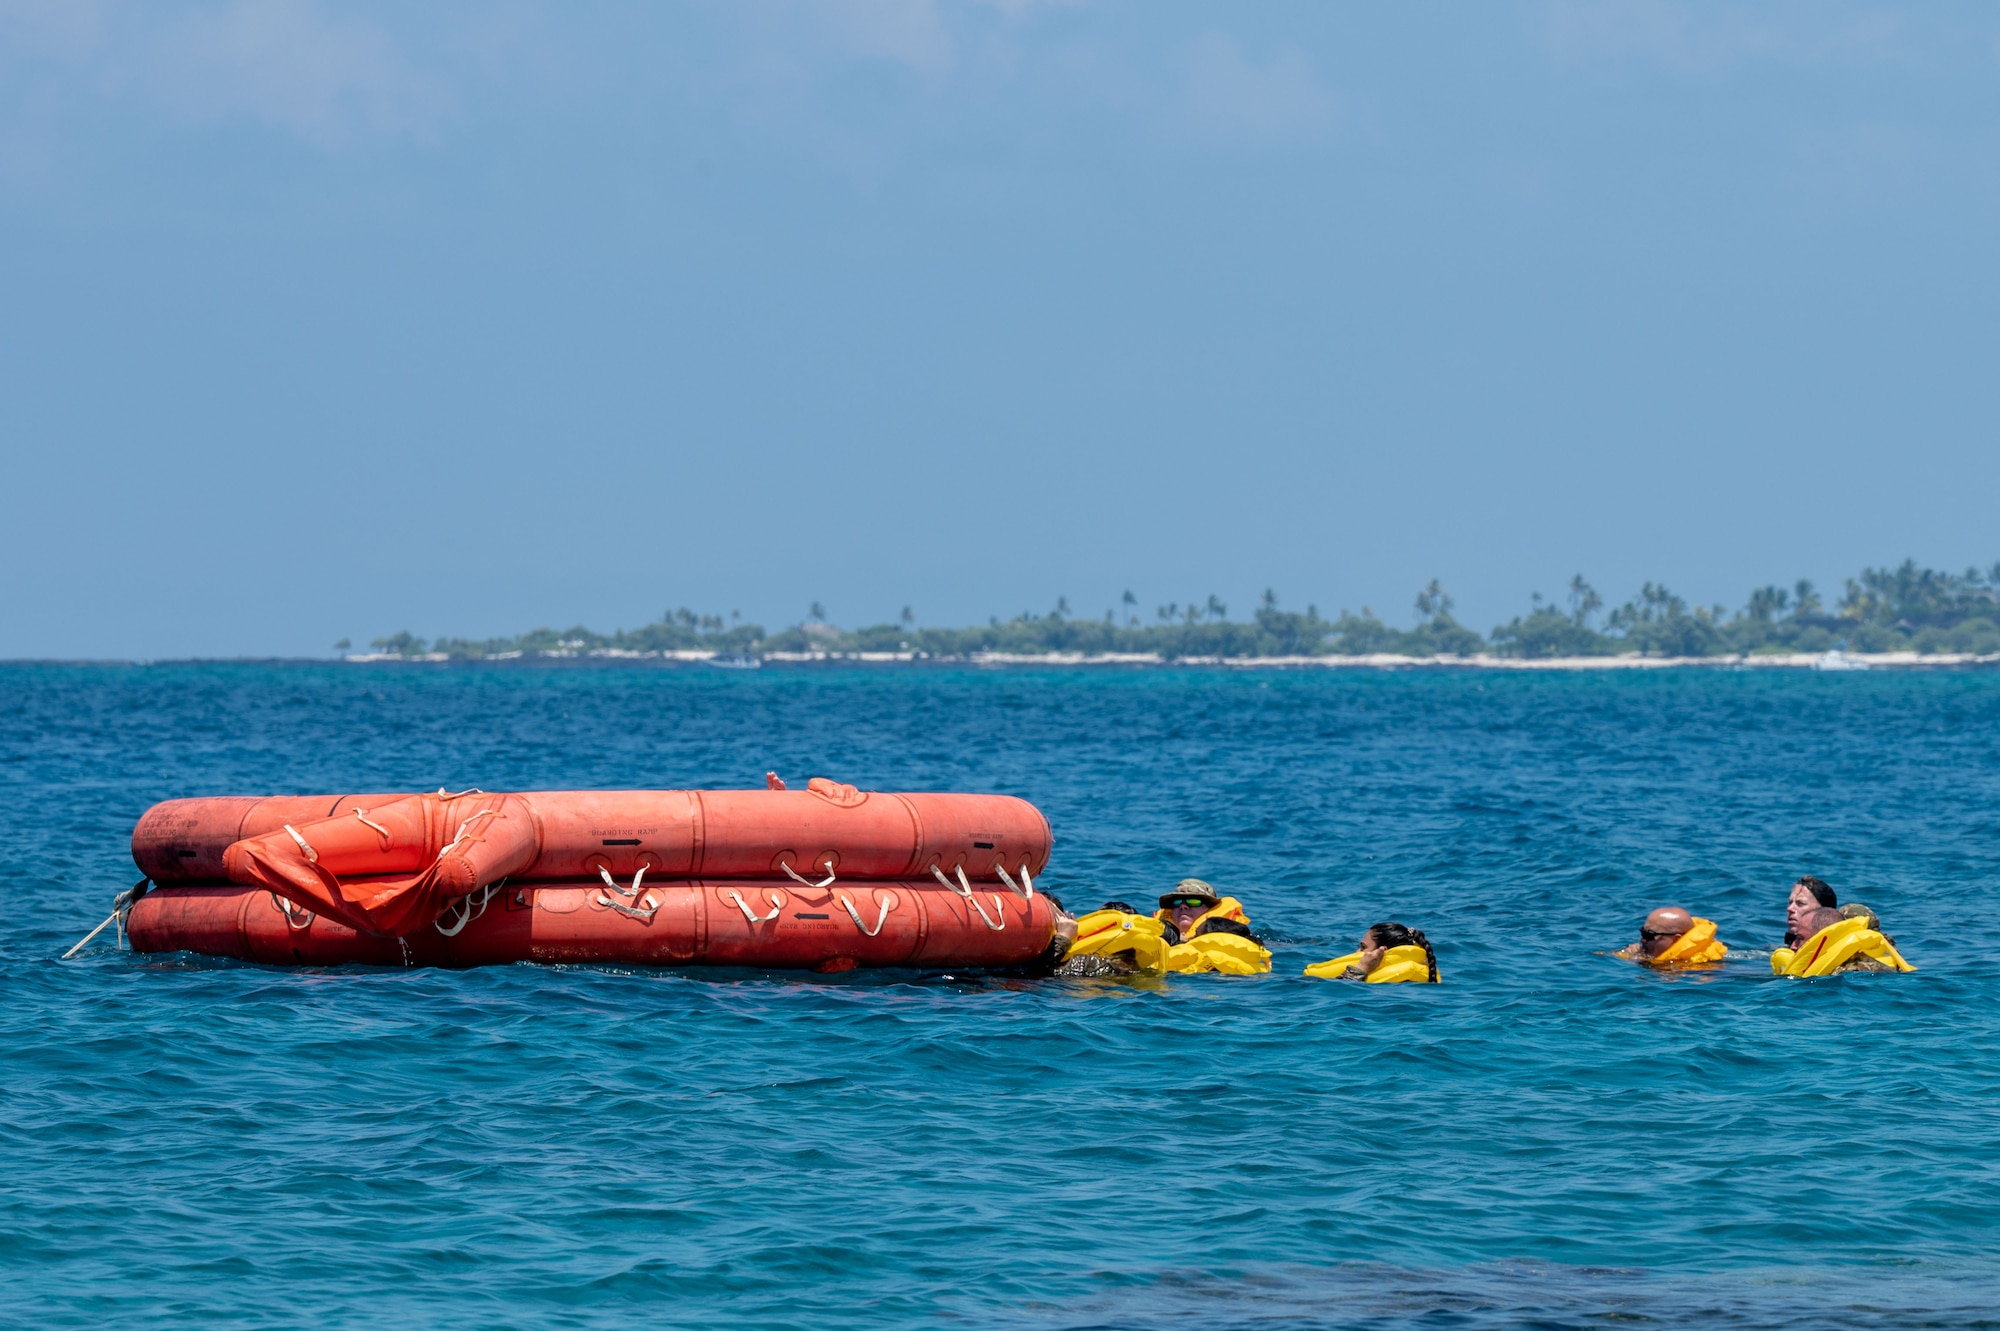 people in yellow life vests float in the water next to an orange life boat